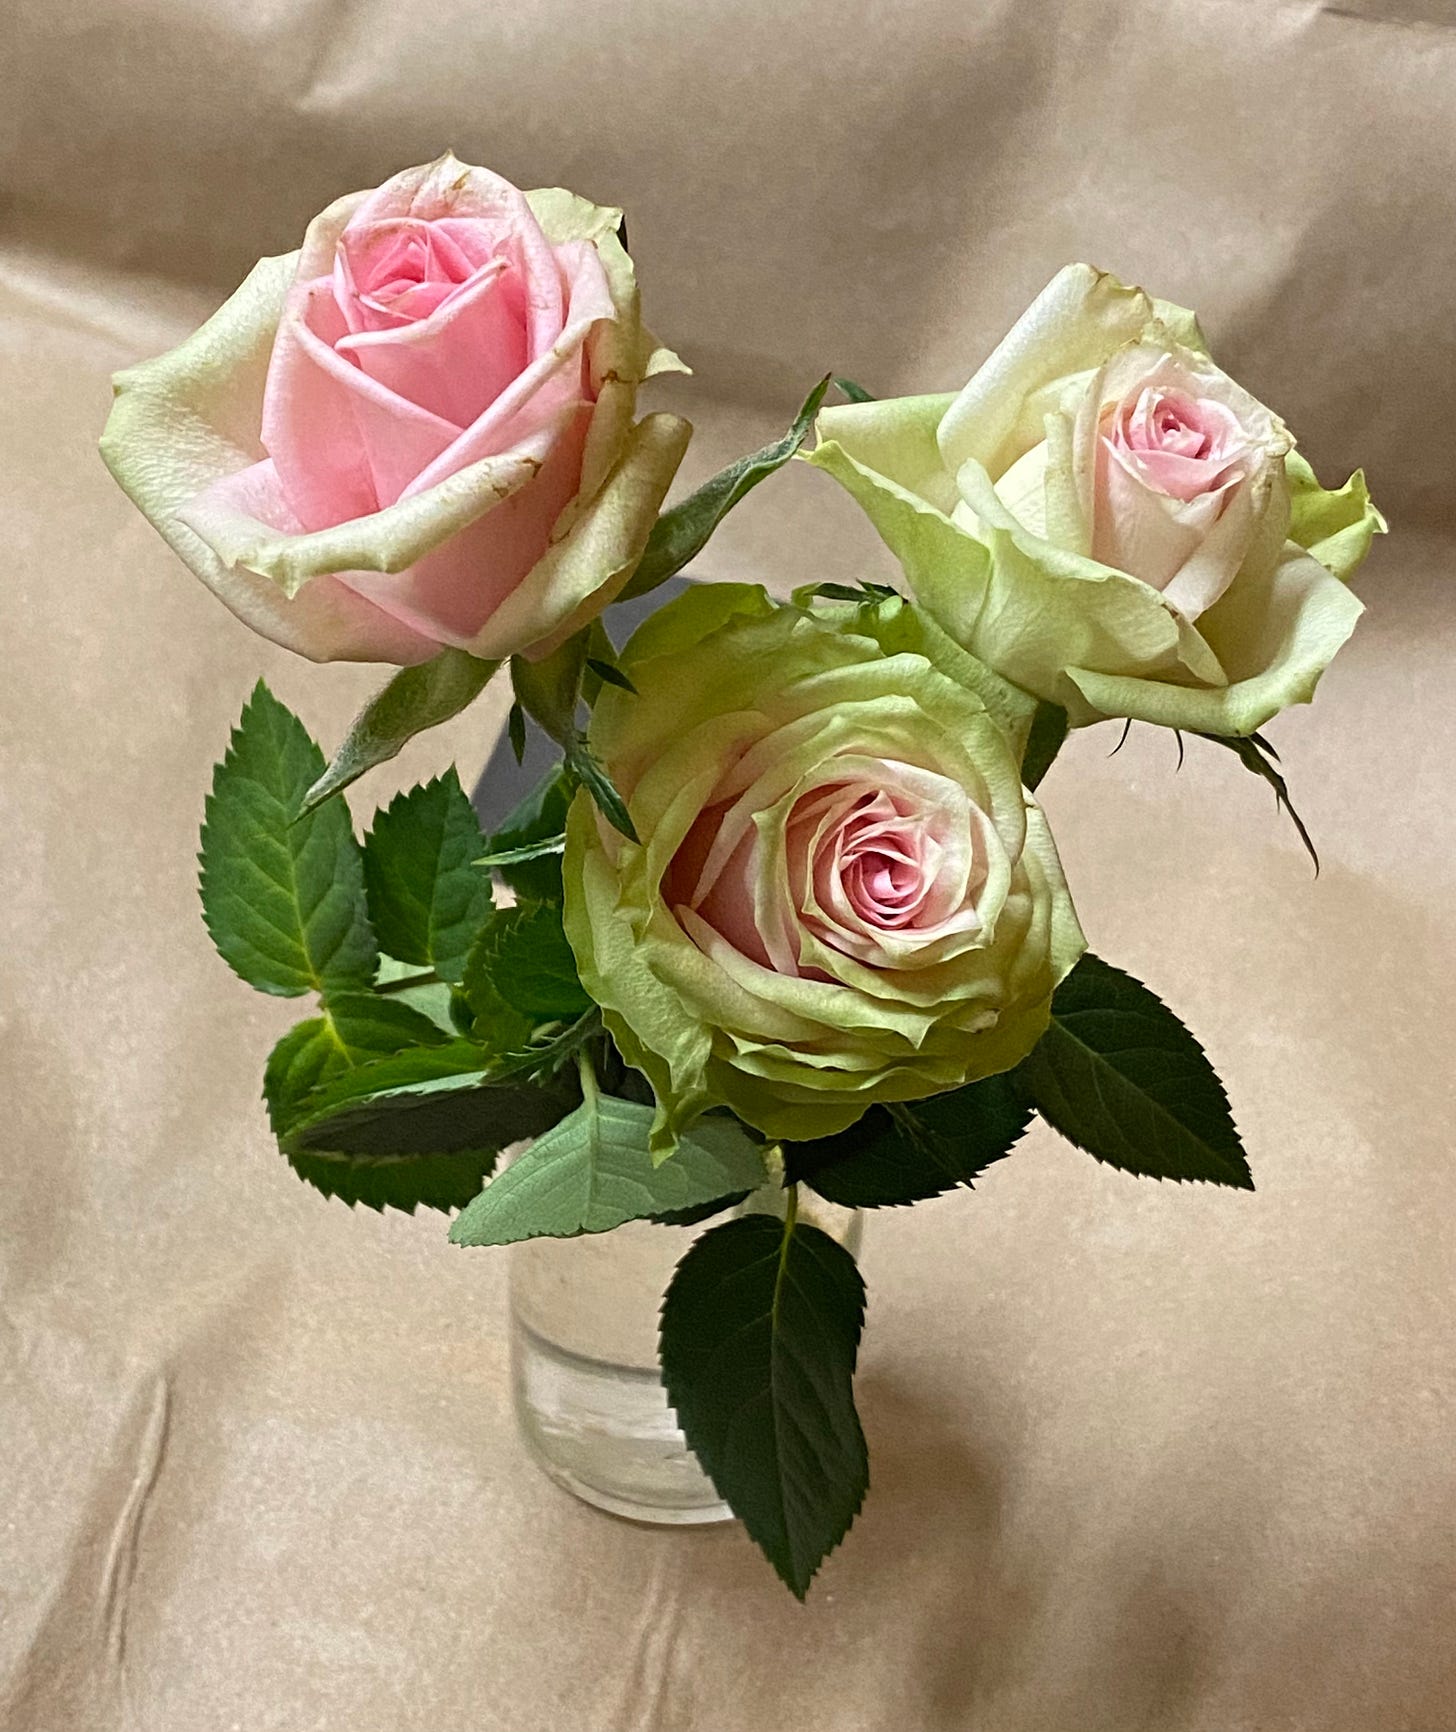 three pink roses with green tips to the petals in a glass vase against a brown paper background 